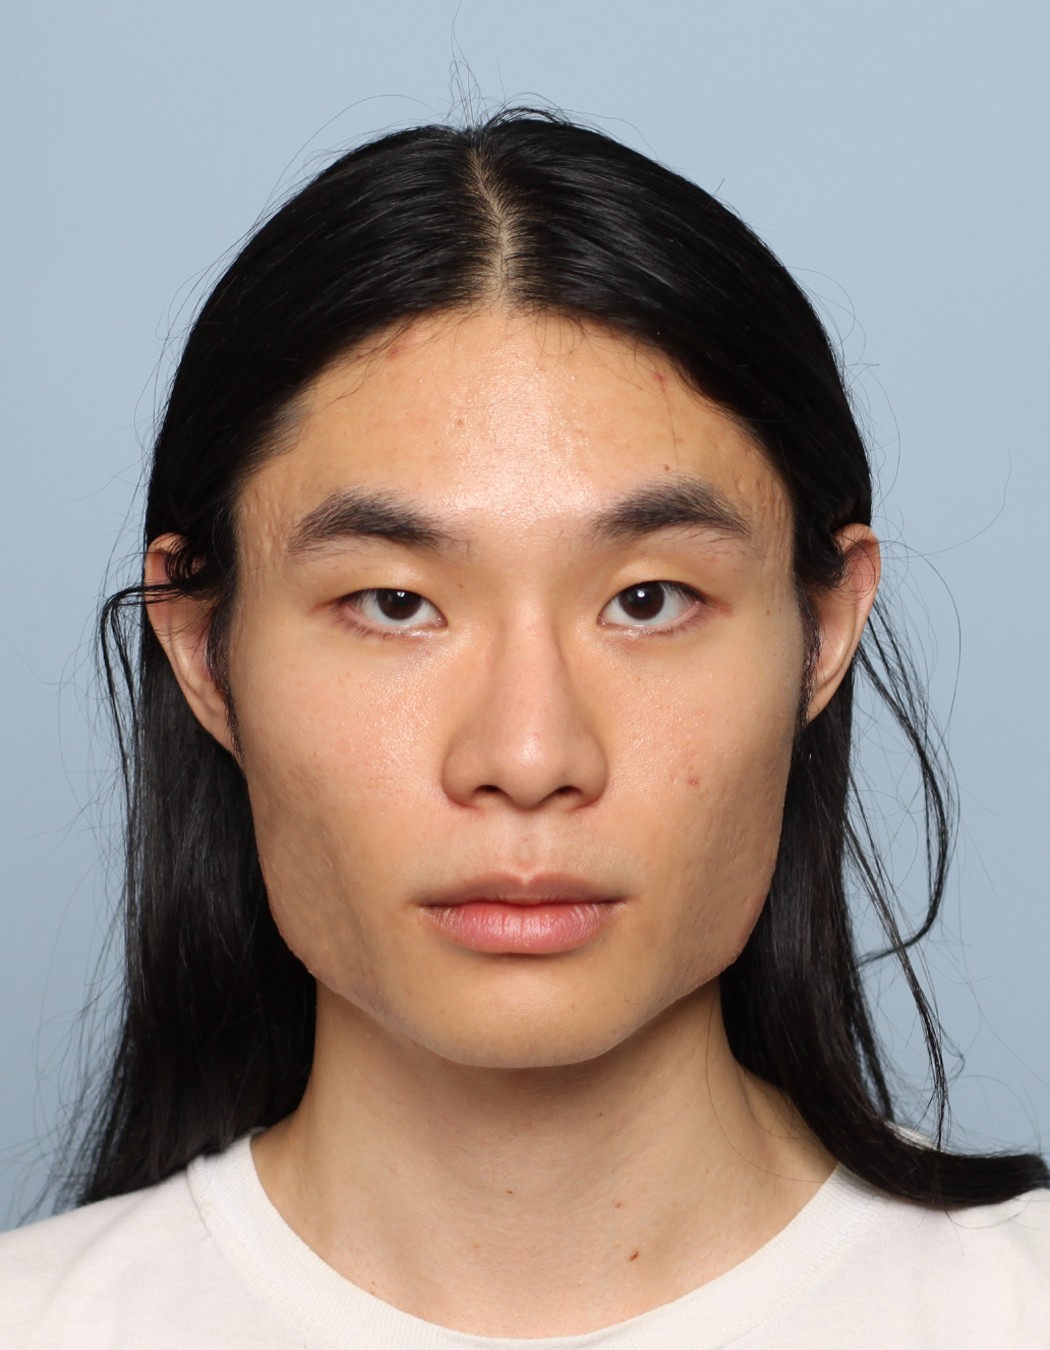 Close-up of a person with shoulder-length hair and a white t-shirt